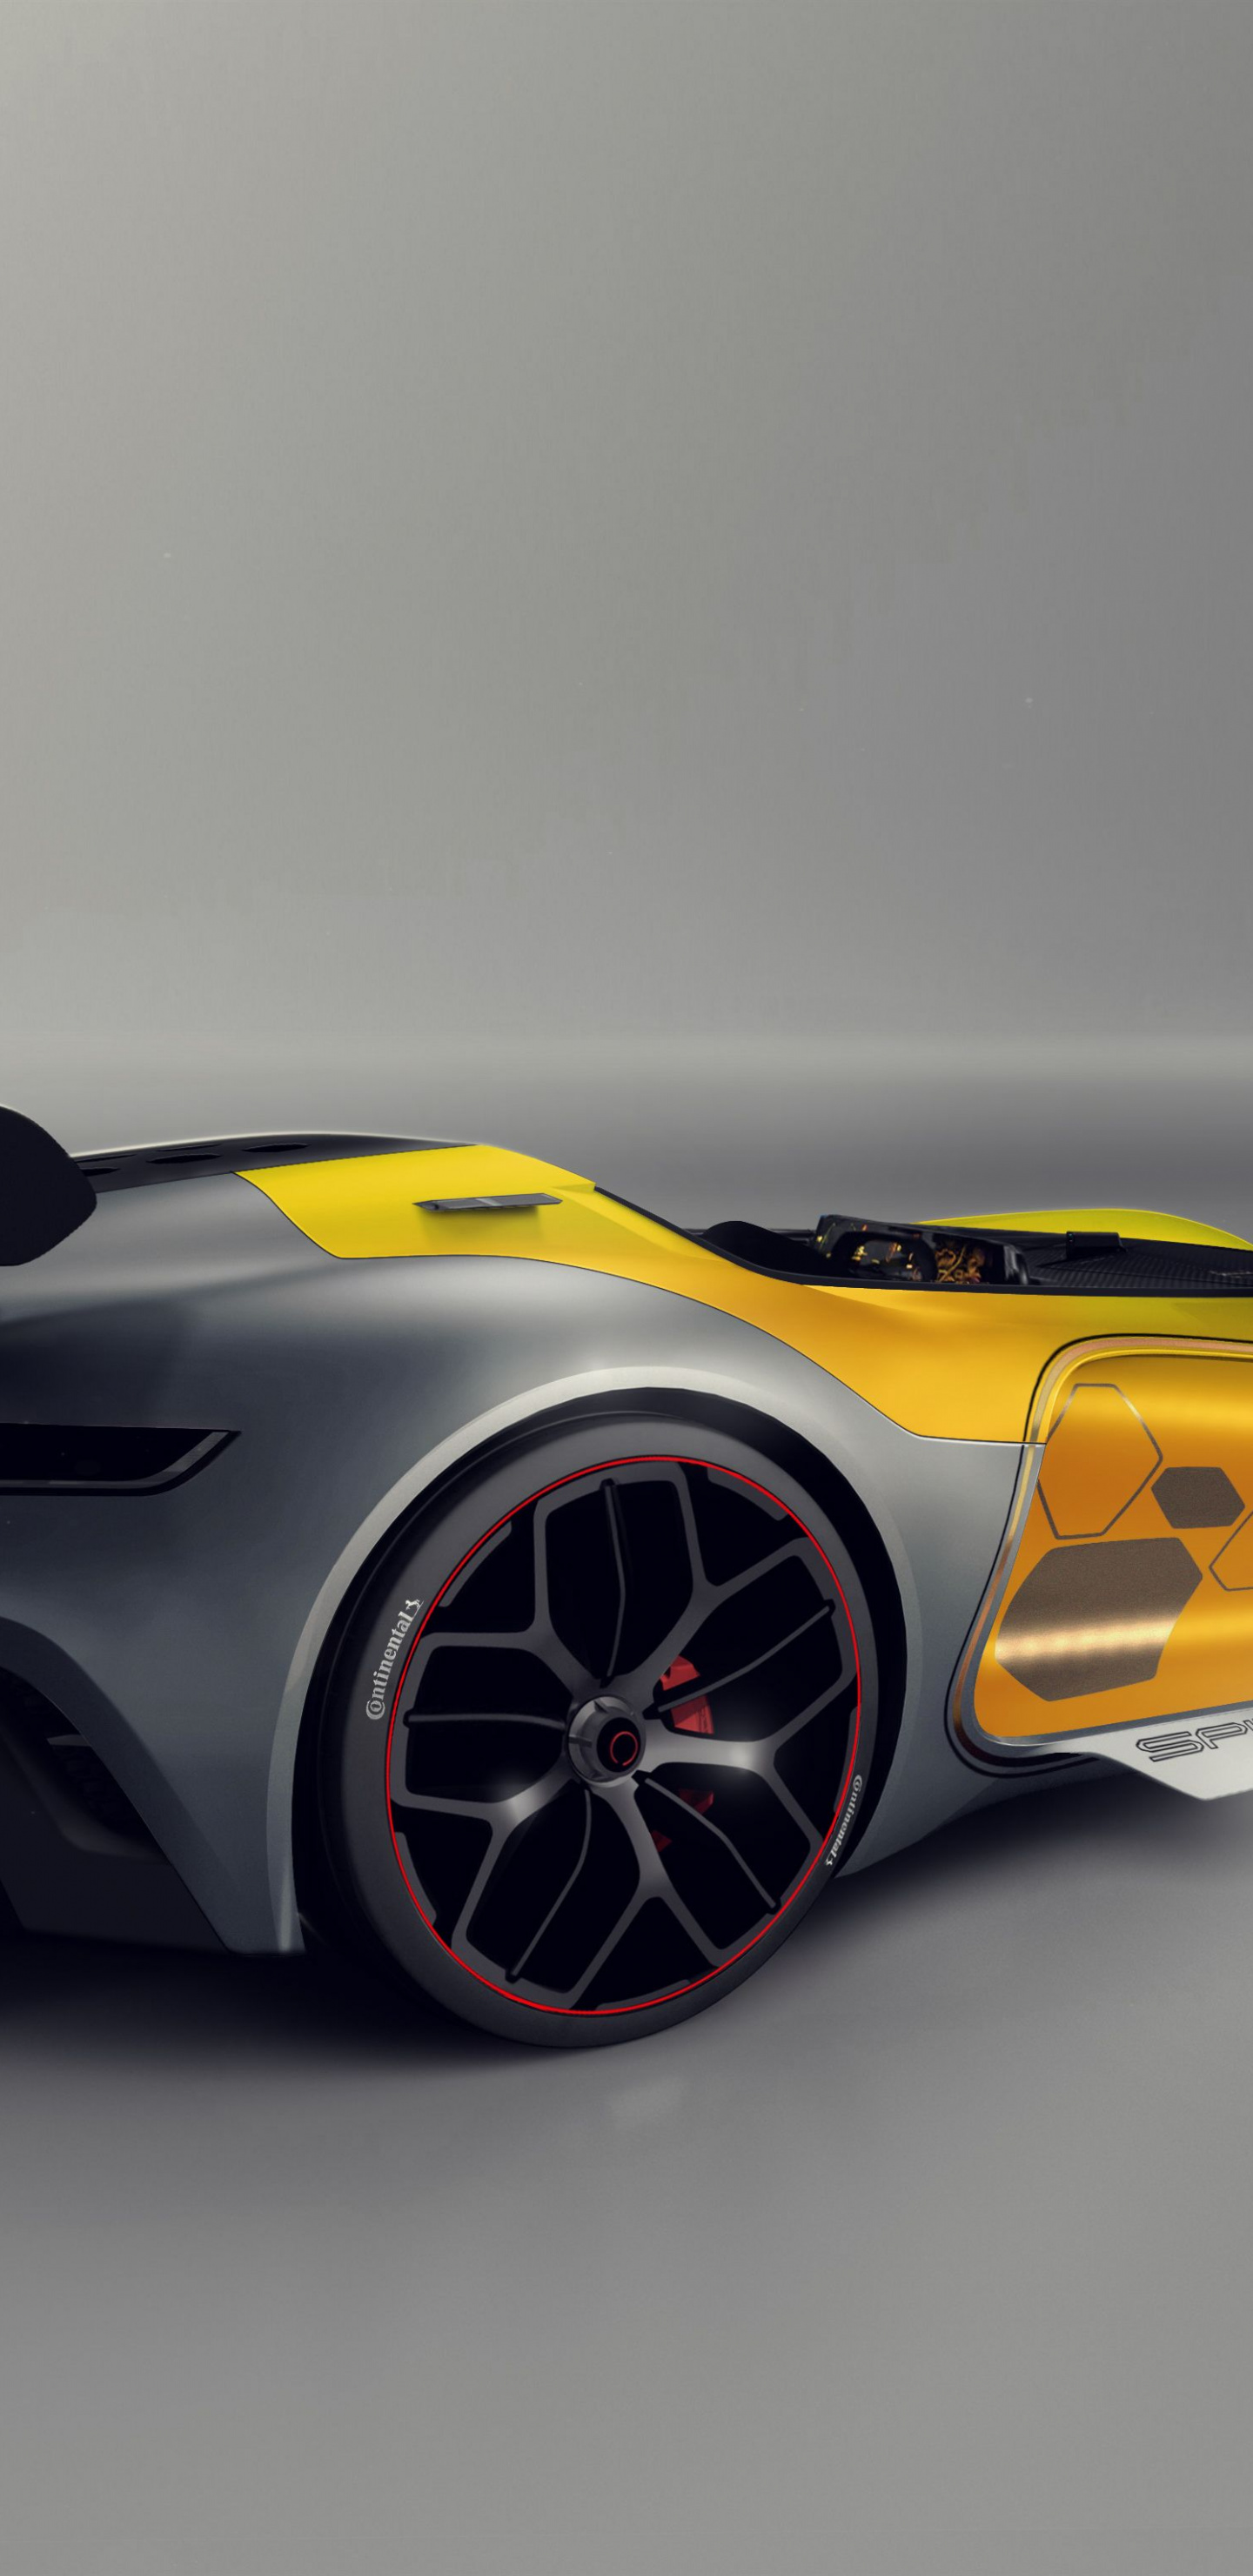 Downaload Renault Spider Revival, Sports Car Wallpaper, - Lambo Challenge Supercars On Behance , HD Wallpaper & Backgrounds